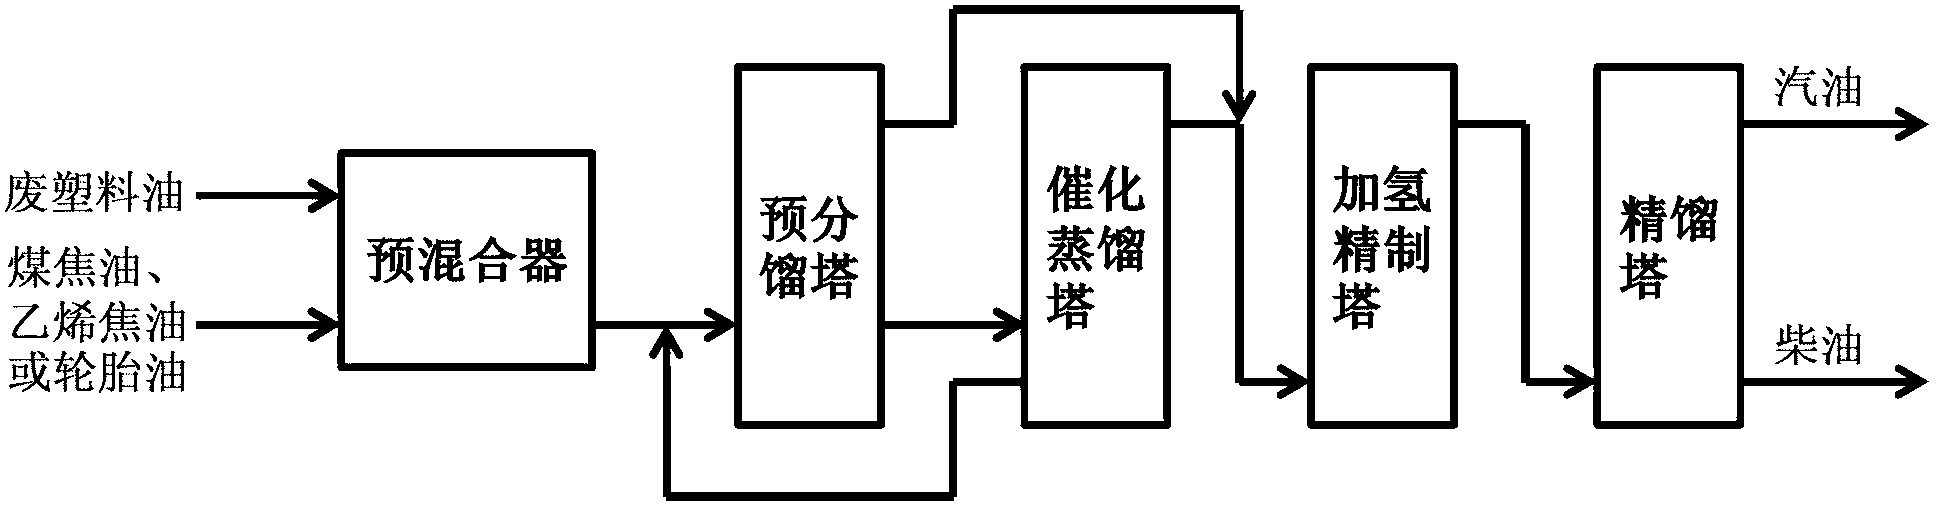 Method for producing gasoline and diesel oil by mixing and refining plastic oil, coal tar, ethylene tar or tire oil